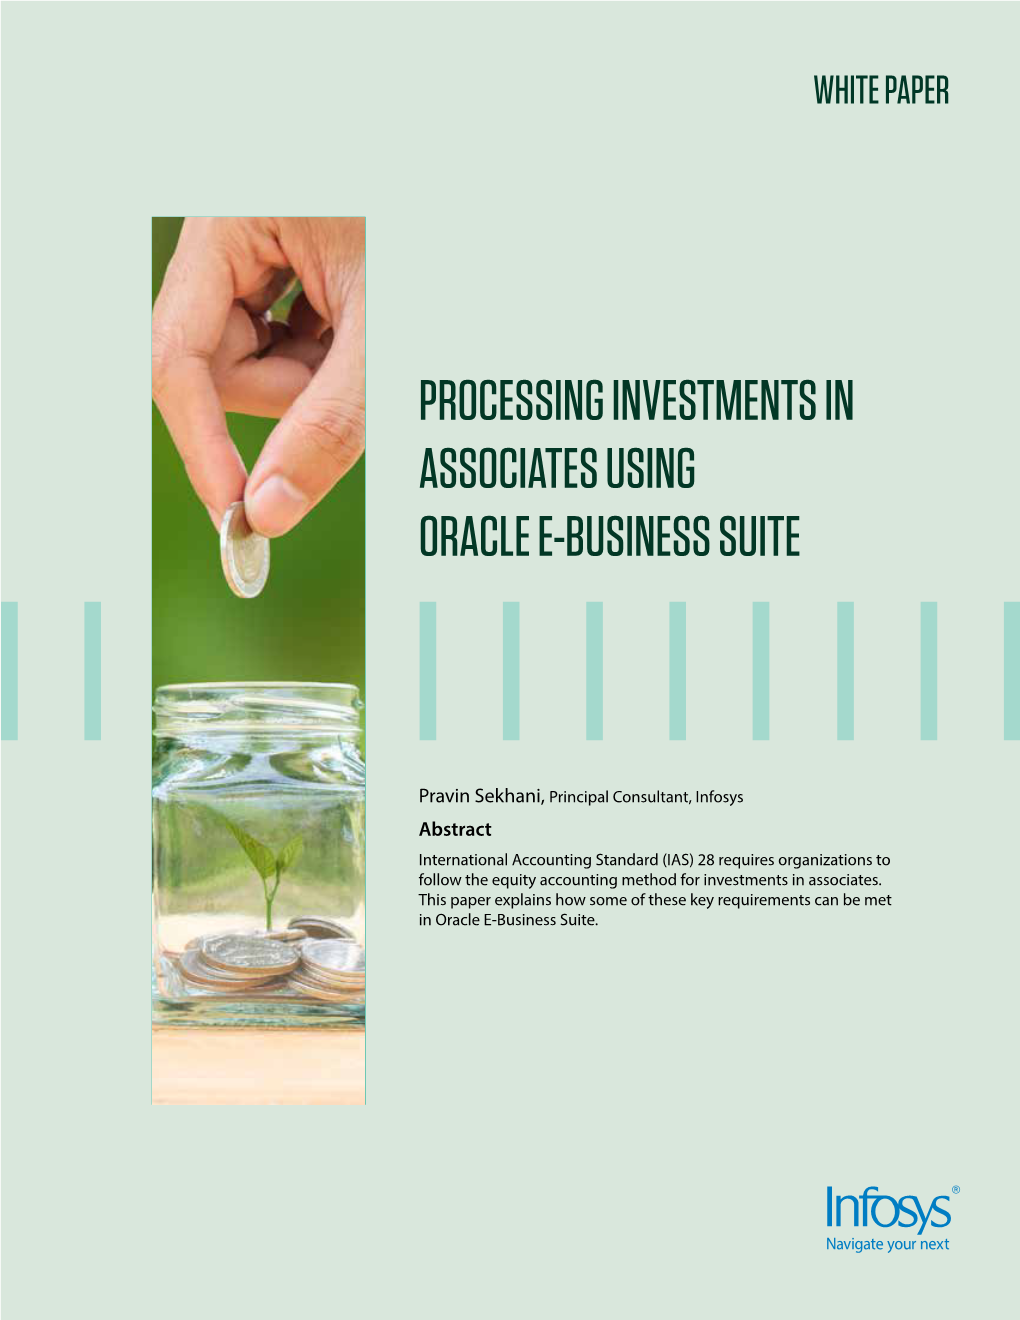 Processing Investments in Associates Using Oracle E-Business Suite